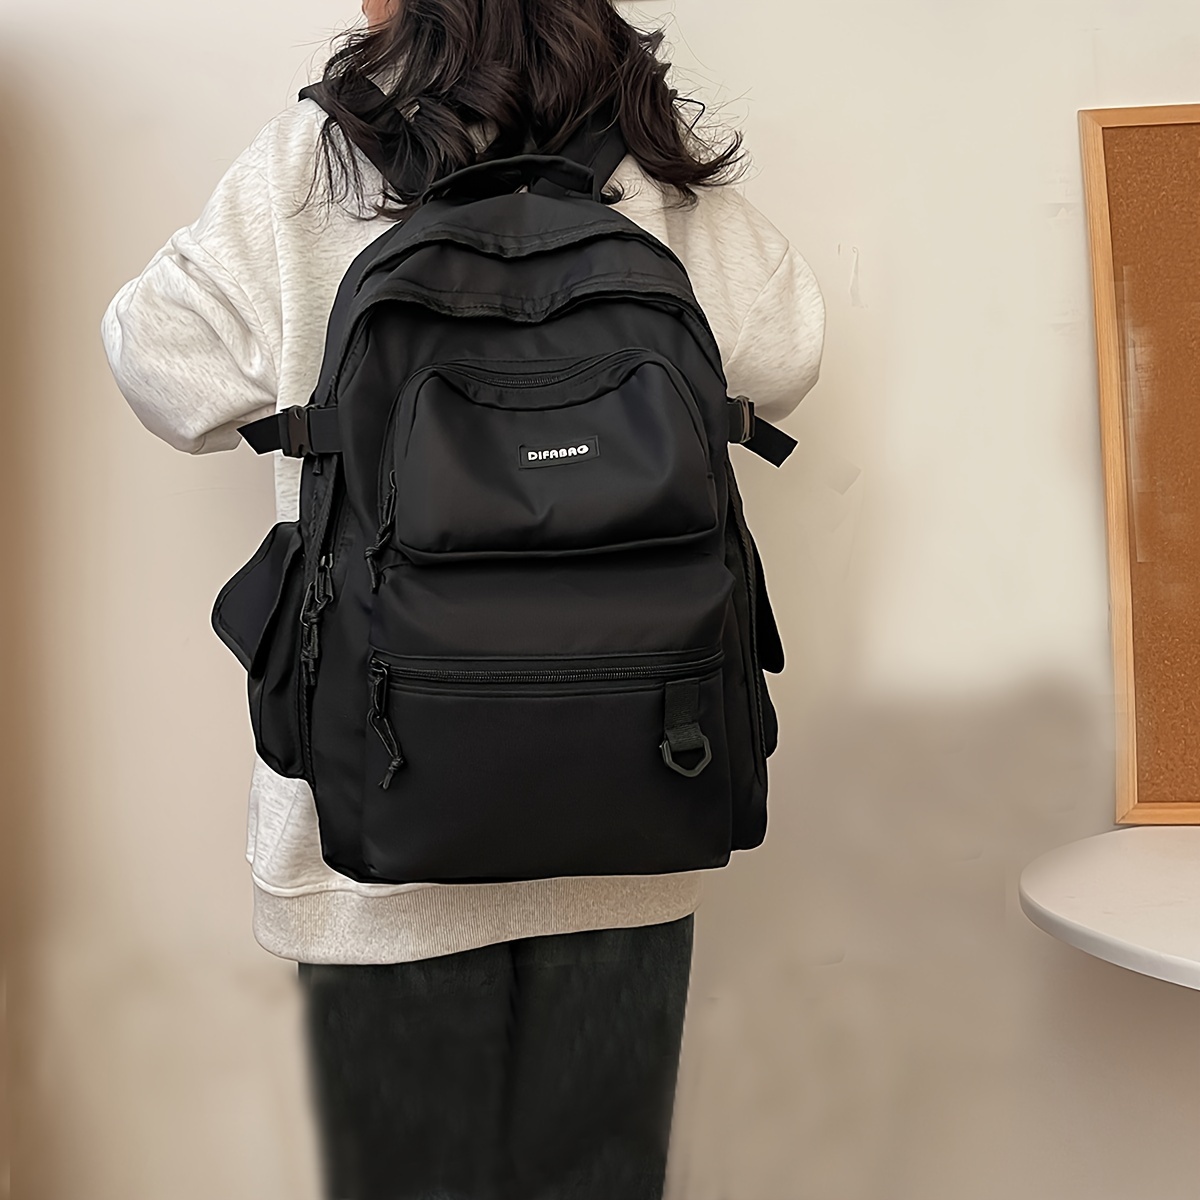 

Minimalist Solid Color Laptop Backpack, Preppy Style School Bag, Back-to-school Casual Nylon Travel Waterproof Daypack